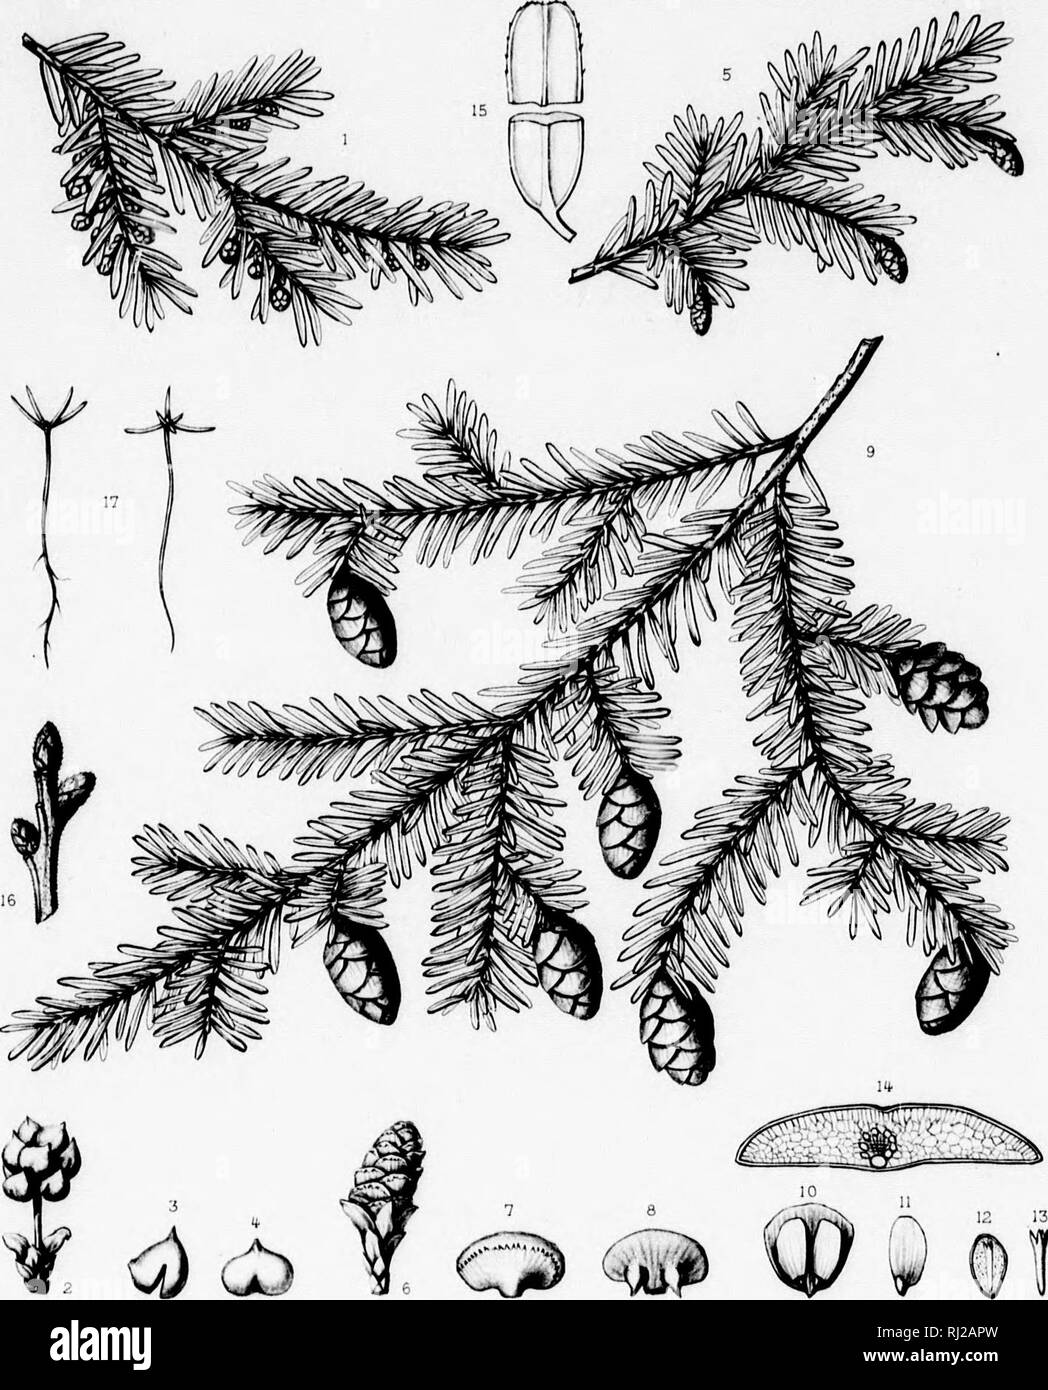 . The silva of North America [microform] : a description of the tree which grow naturally in North America exclusive of Mexico. Trees; Trees; Gymnosperms; Conifers; Arbres; Arbres; Gymnospermes; ConifÃ¨res. Silva of North America. Tab.DCIII â '? .. (-,}!. yu.rtm (/&lt;V. Â£rruHi/nehf sc. TSUGA CANADENSIS, Cam .-/ .'Uo -riHi,r itimr /ni/t.^/. Taneur P&lt;iri.t: i y Iralm' 'H i lii ii; !i i 1 i 1 1 â &quot;i â¢ 1. Please note that these images are extracted from scanned page images that may have been digitally enhanced for readability - coloration and appearance of these illustrations may not pe Stock Photo